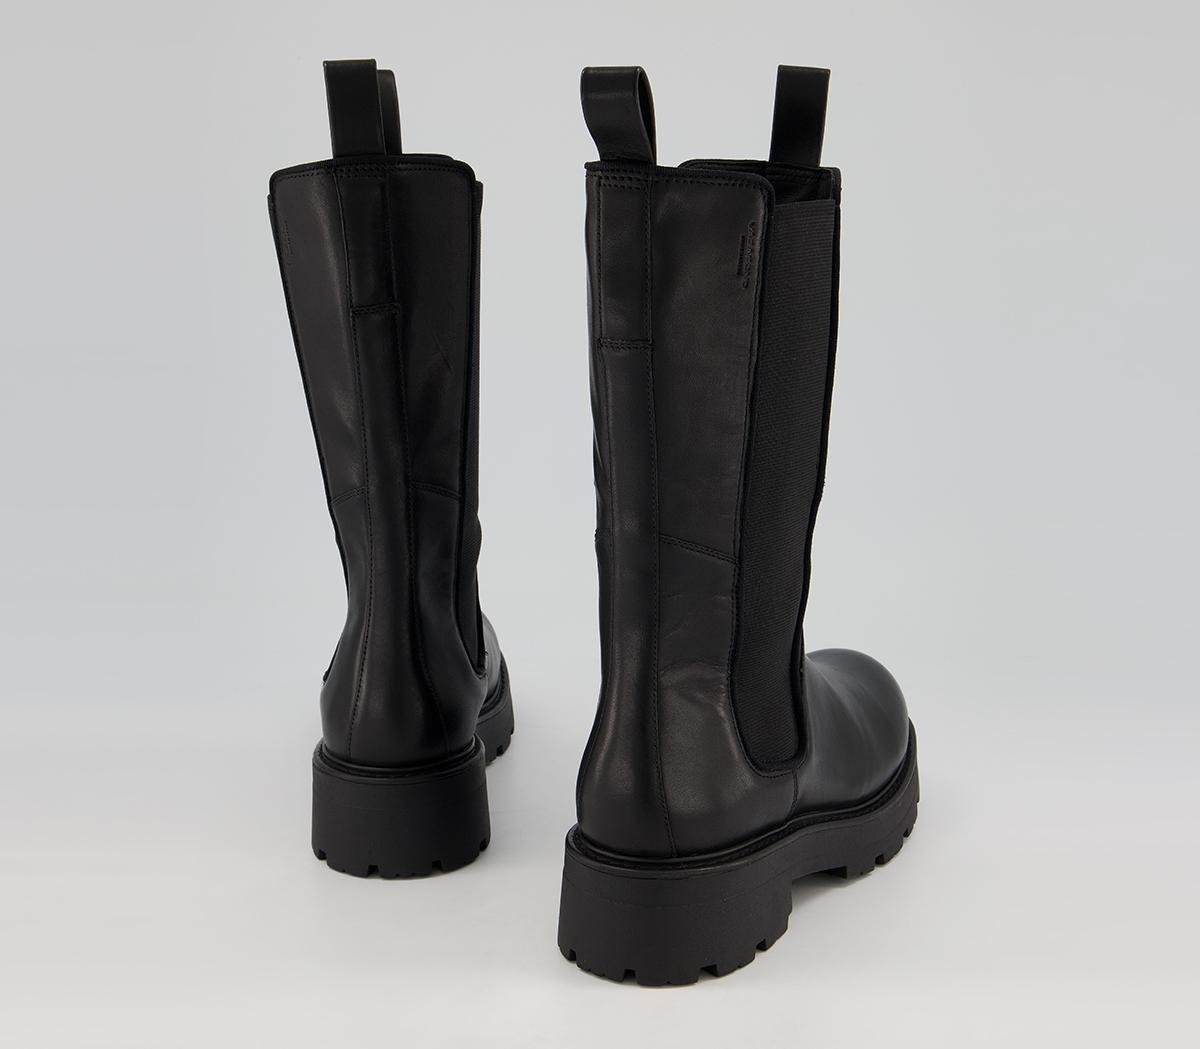 Vagabond Shoemakers Cosmo 2.0 Tall Boots Black - Knee High Boots